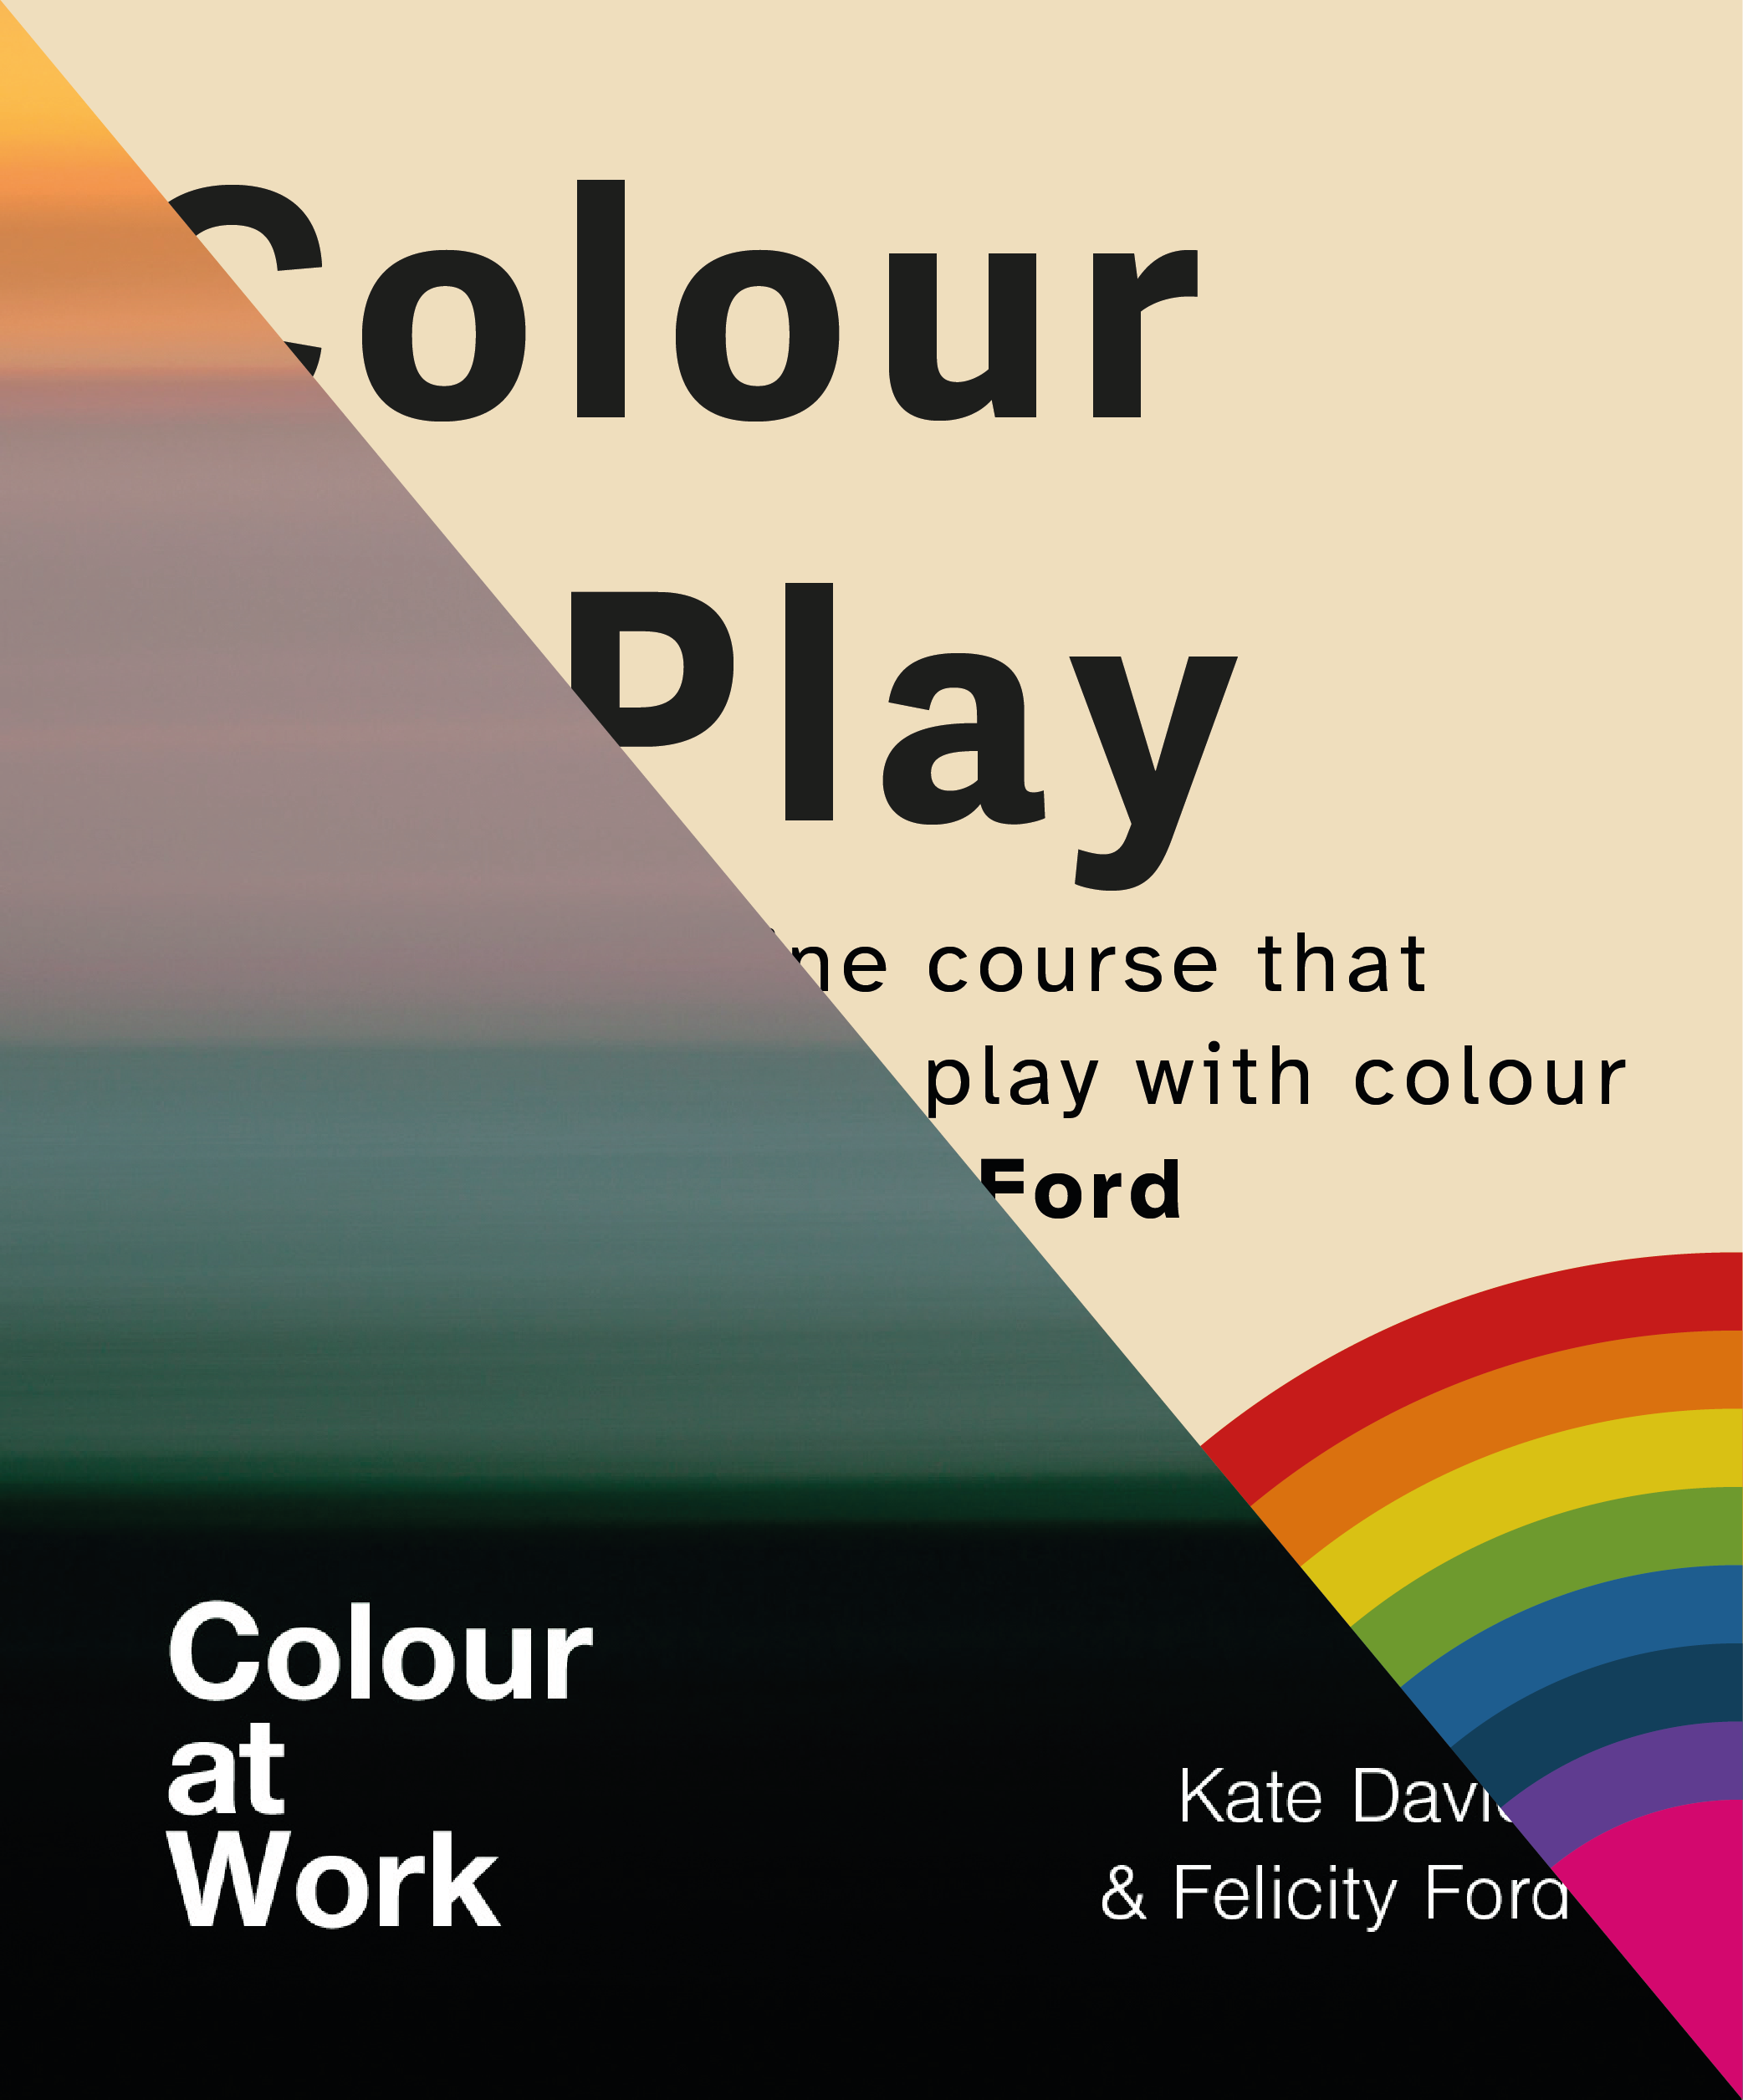 Colour at Work, Colour at Play, book and course bundle (Pre-order)